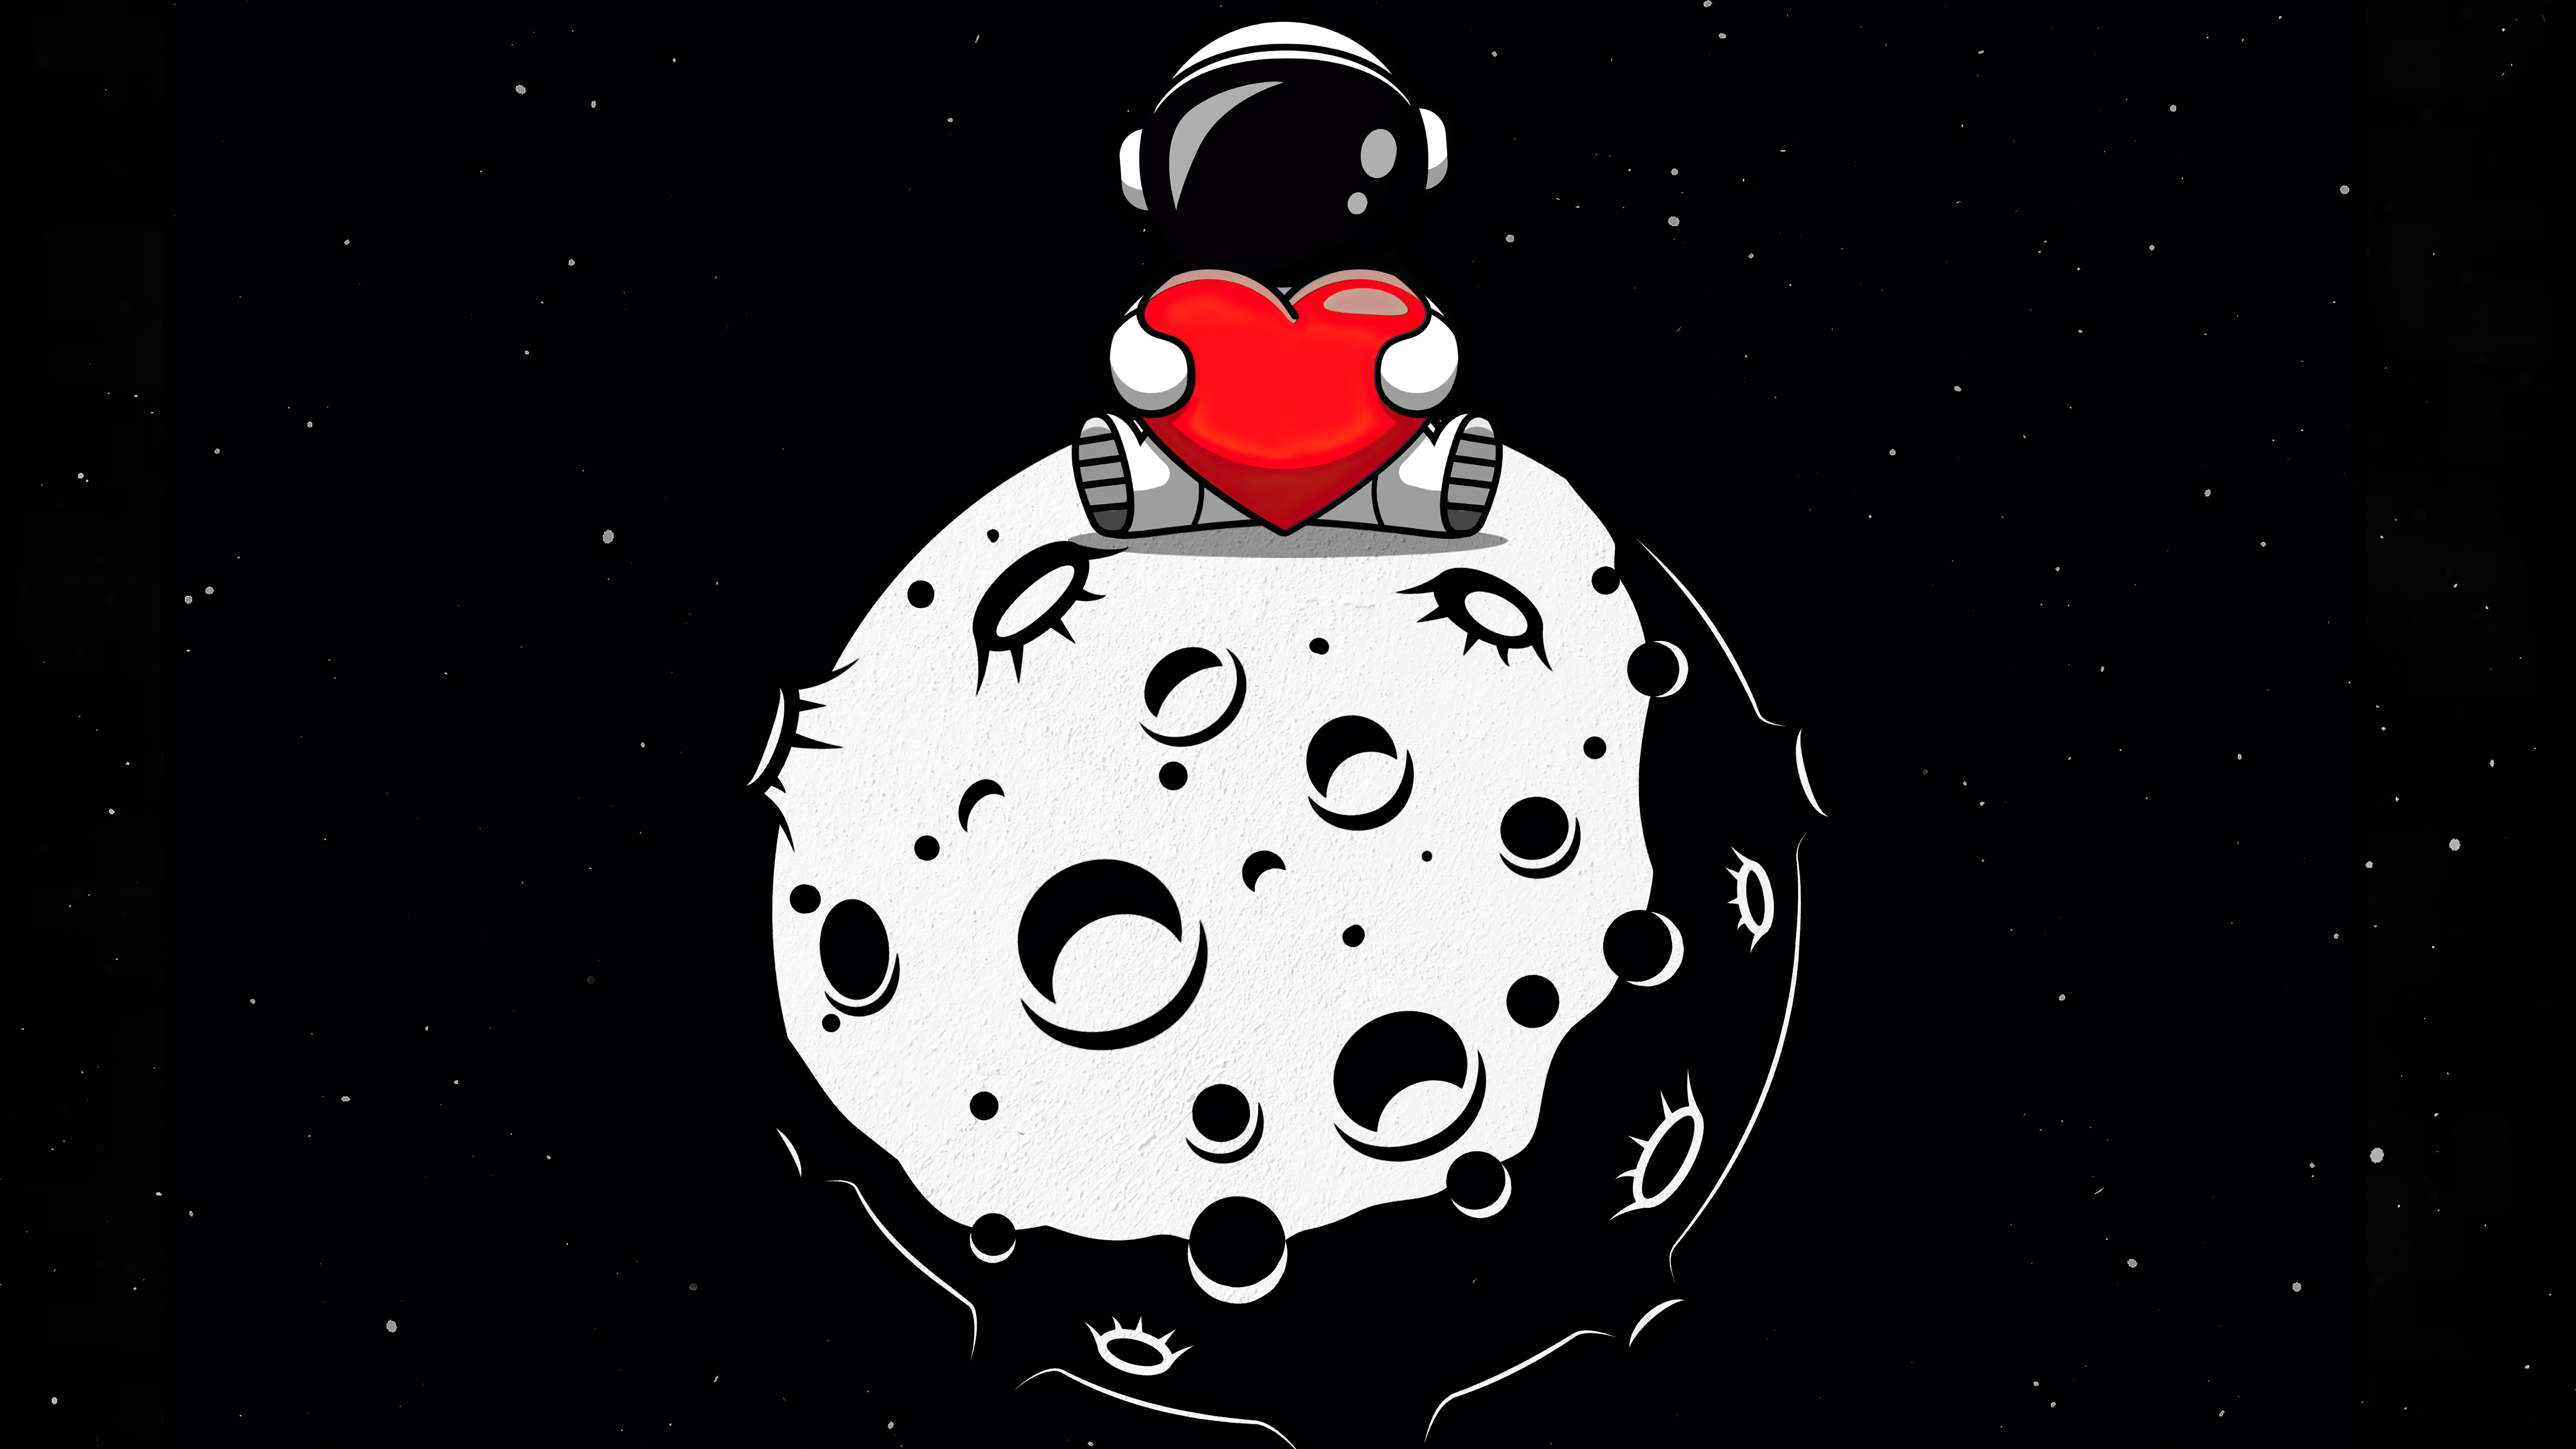 Little Astronaut On Moon With Heart In Hand 5k, HD Artist, 4k Wallpaper, Image, Background, Photo and Picture